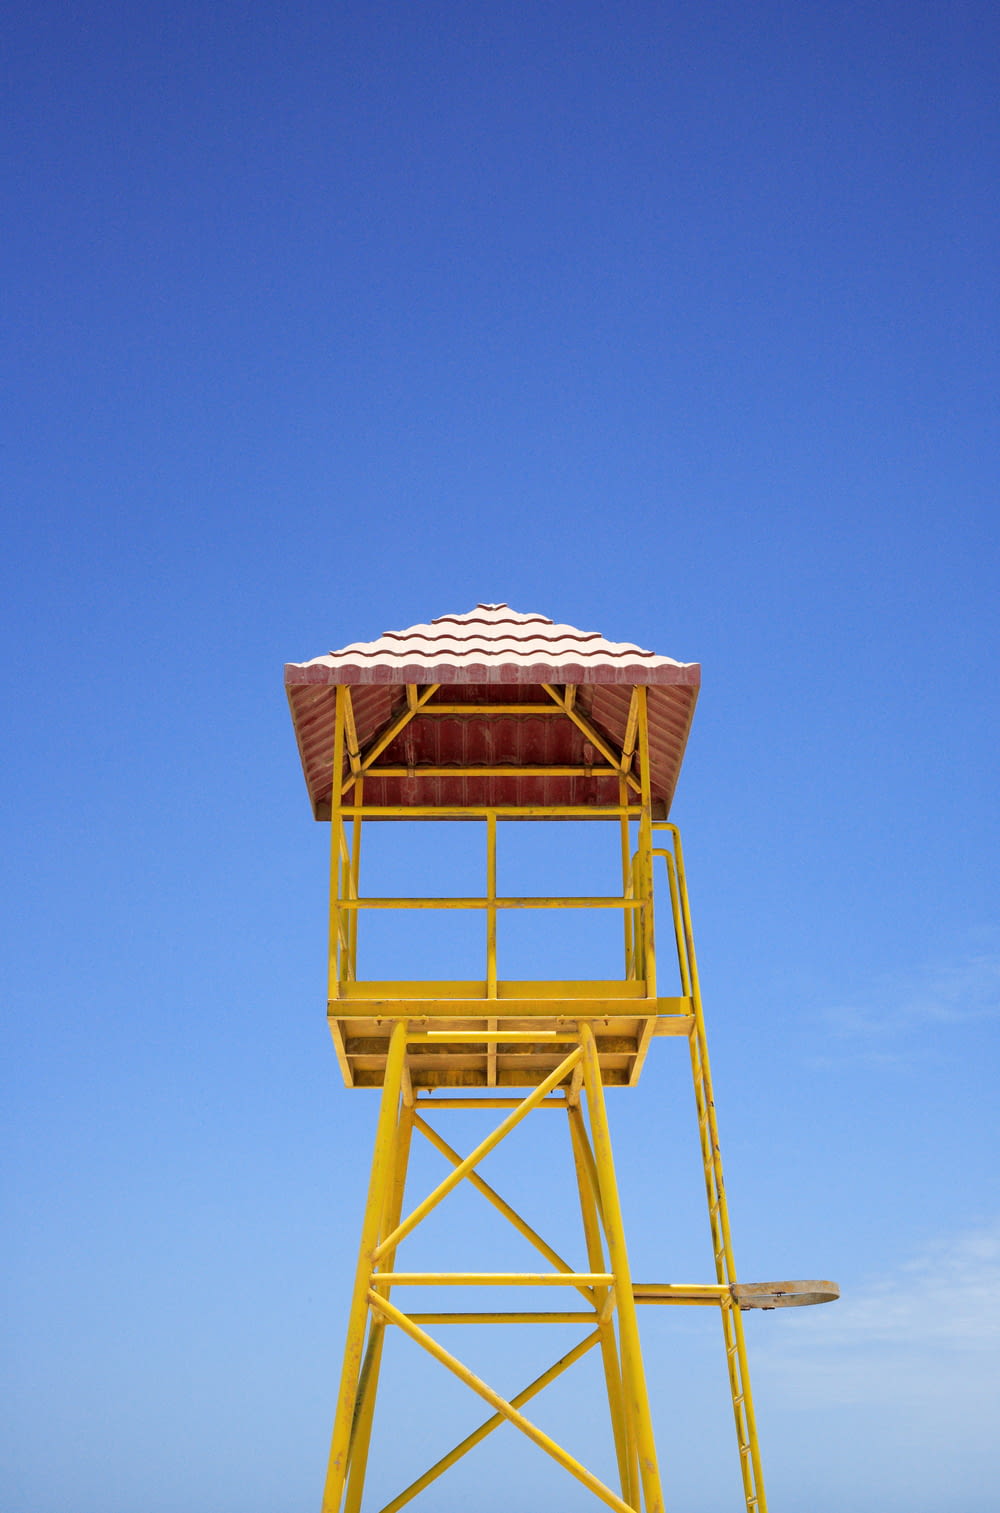 brown wooden tower under blue sky during daytime